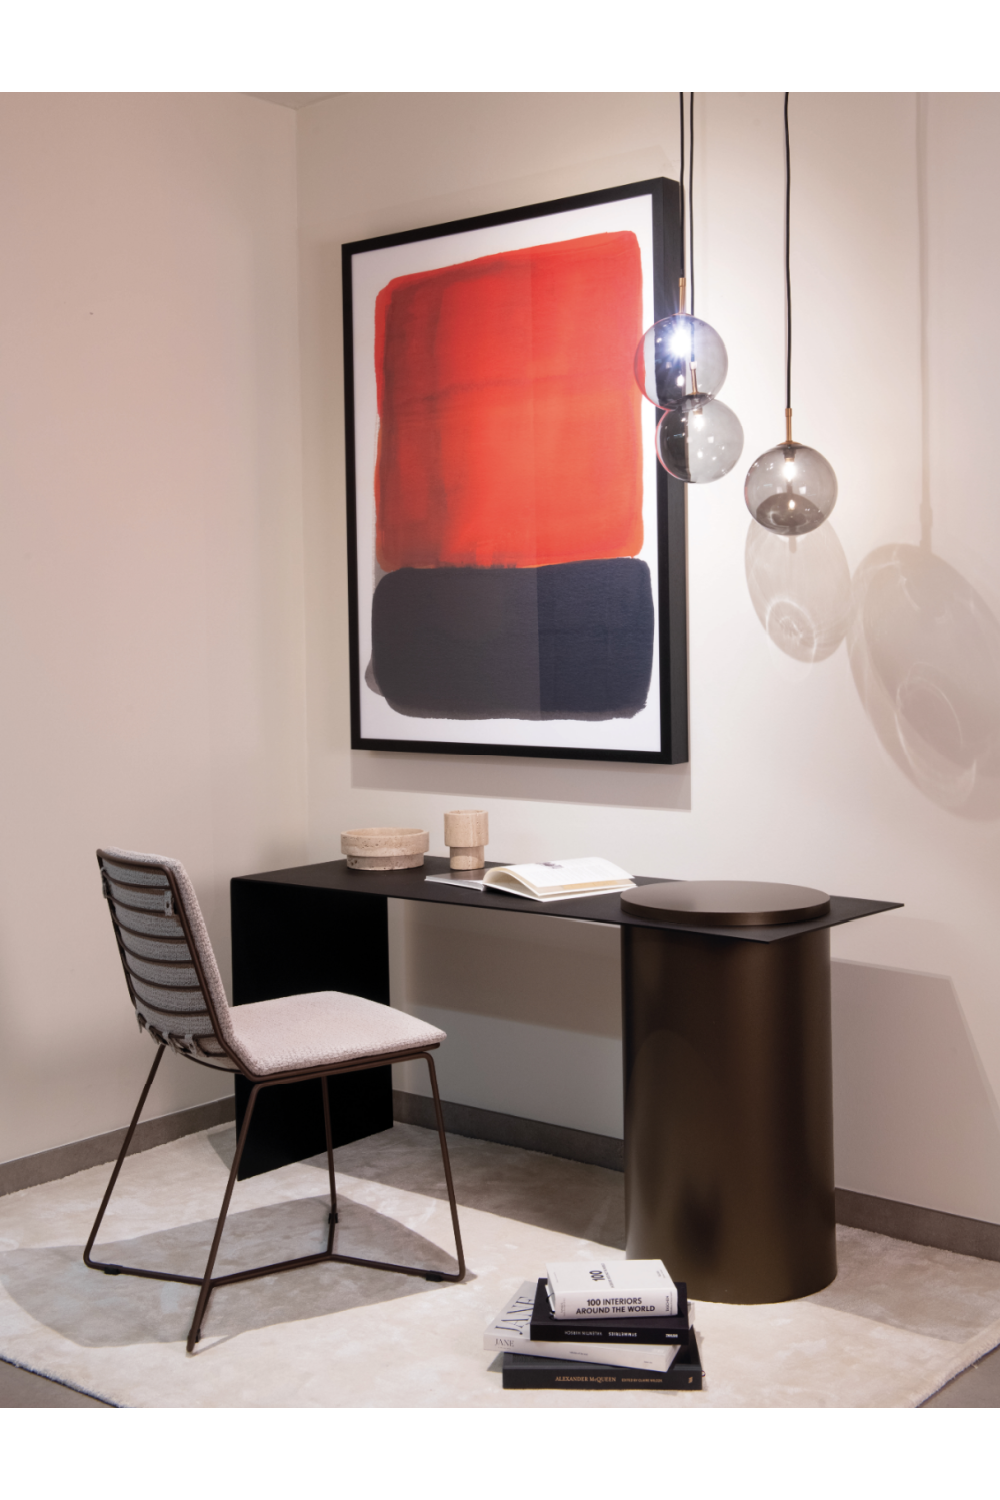 Red And Black Painting | Dome Deco Ultra Concretion | Oroa.com